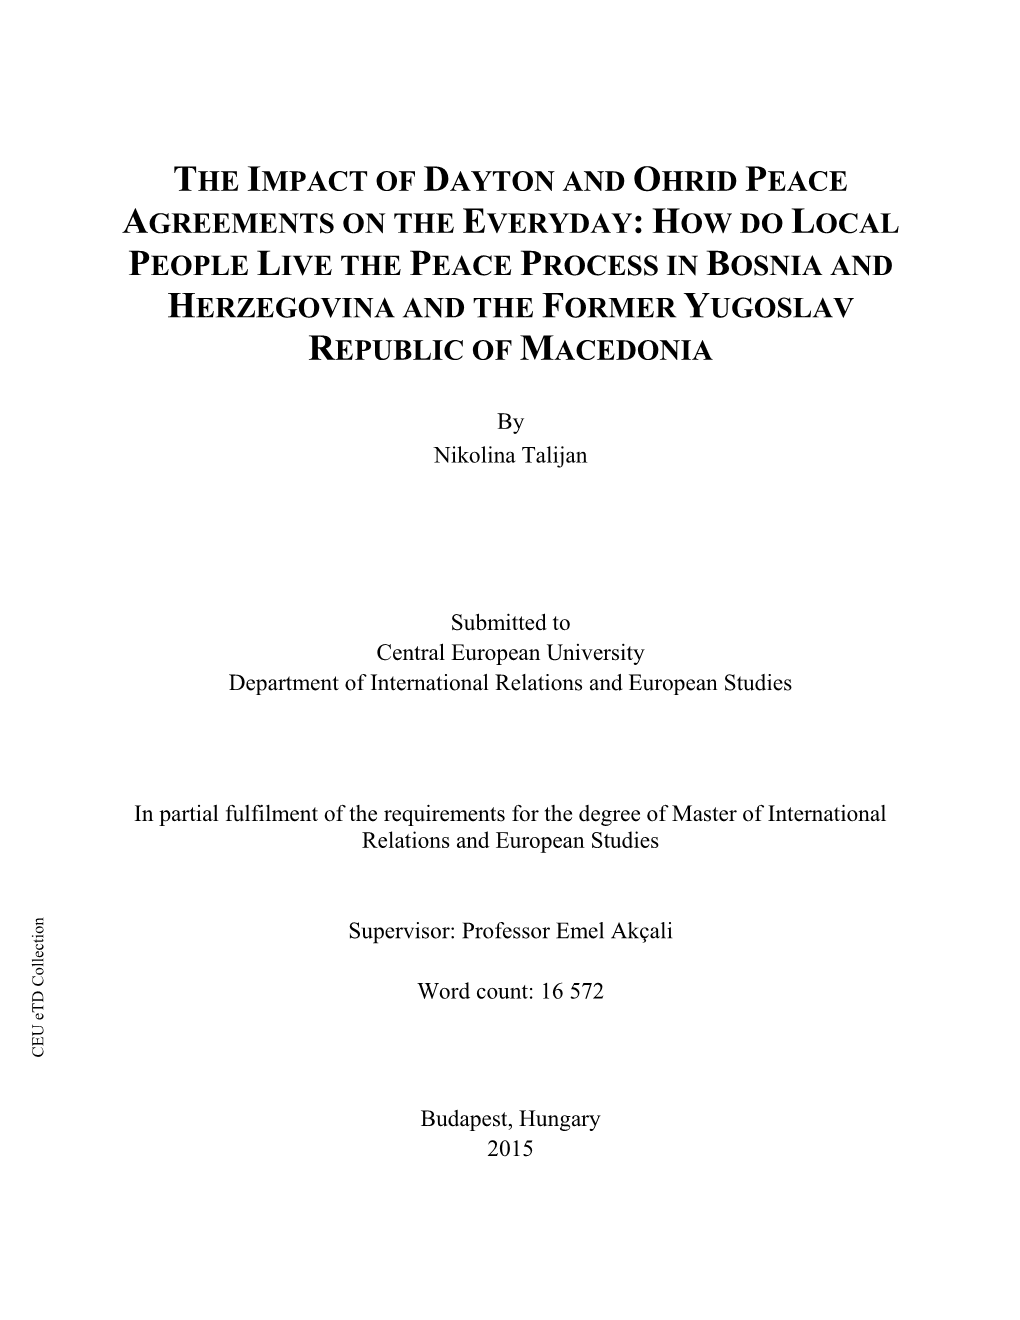 The Impact of Dayton and Ohrid Peace Agreements On